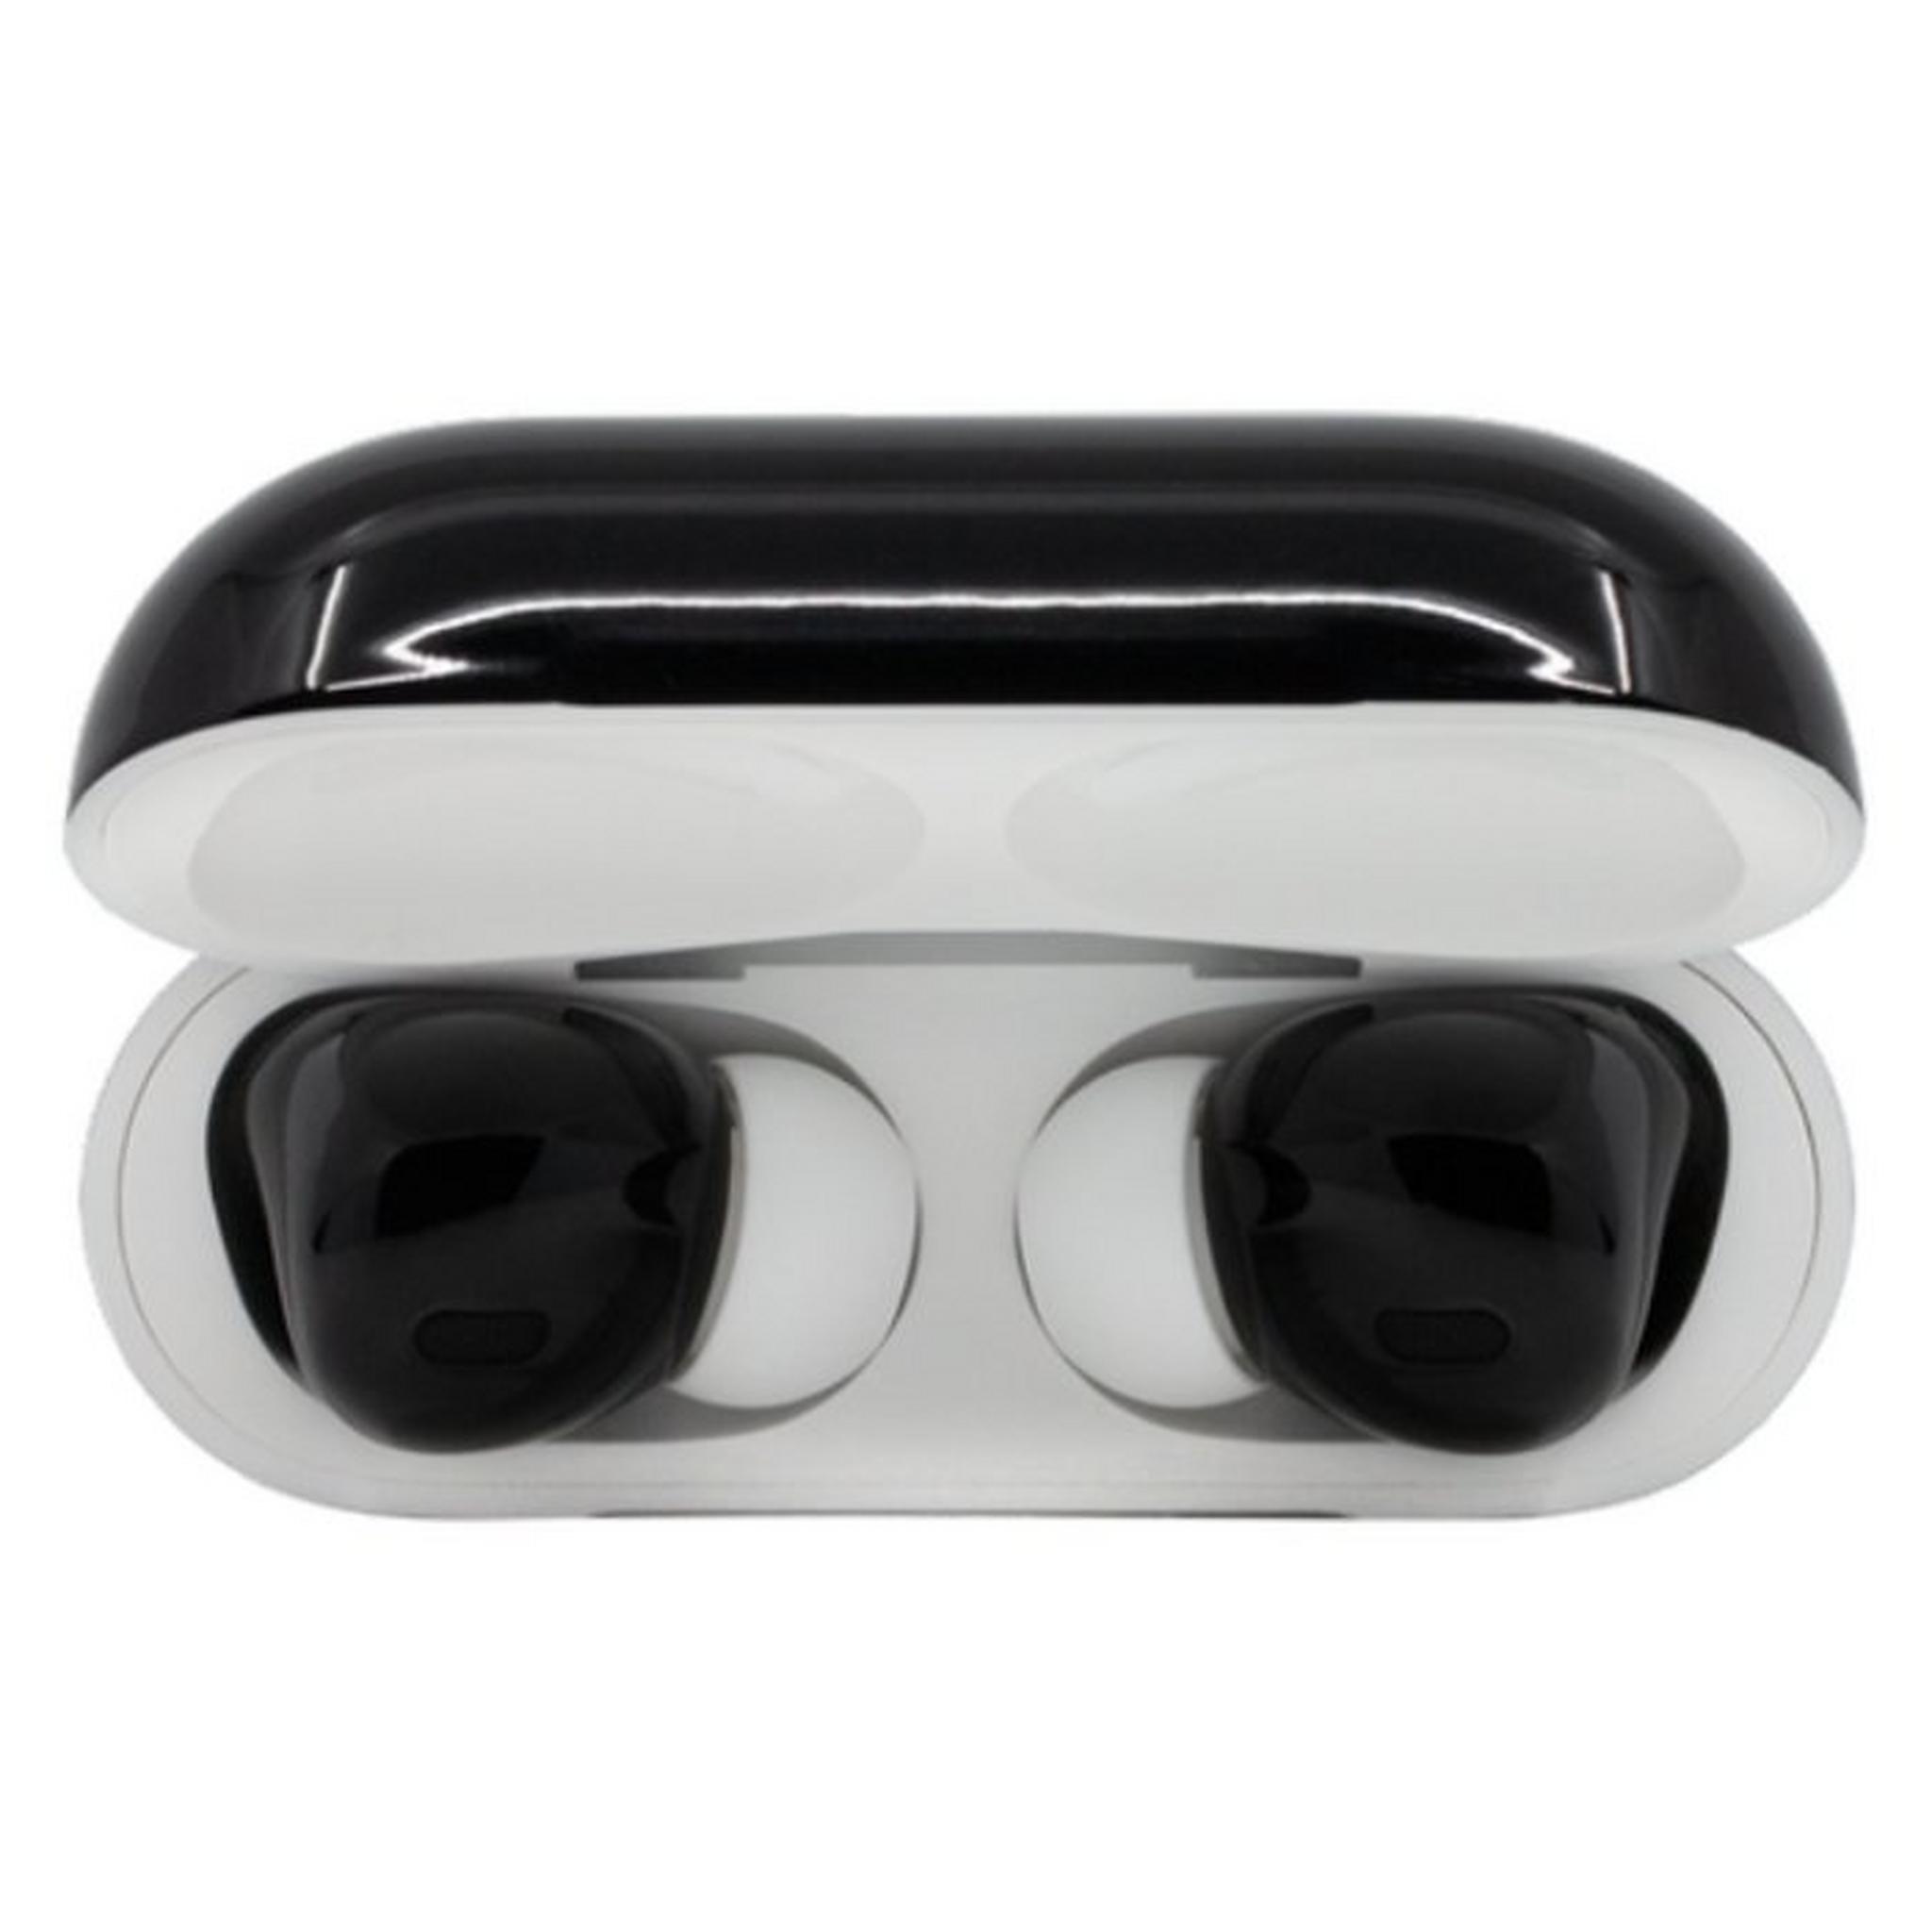 Switch Paint Airpods Pro MagSafe - Jet Black Gloss